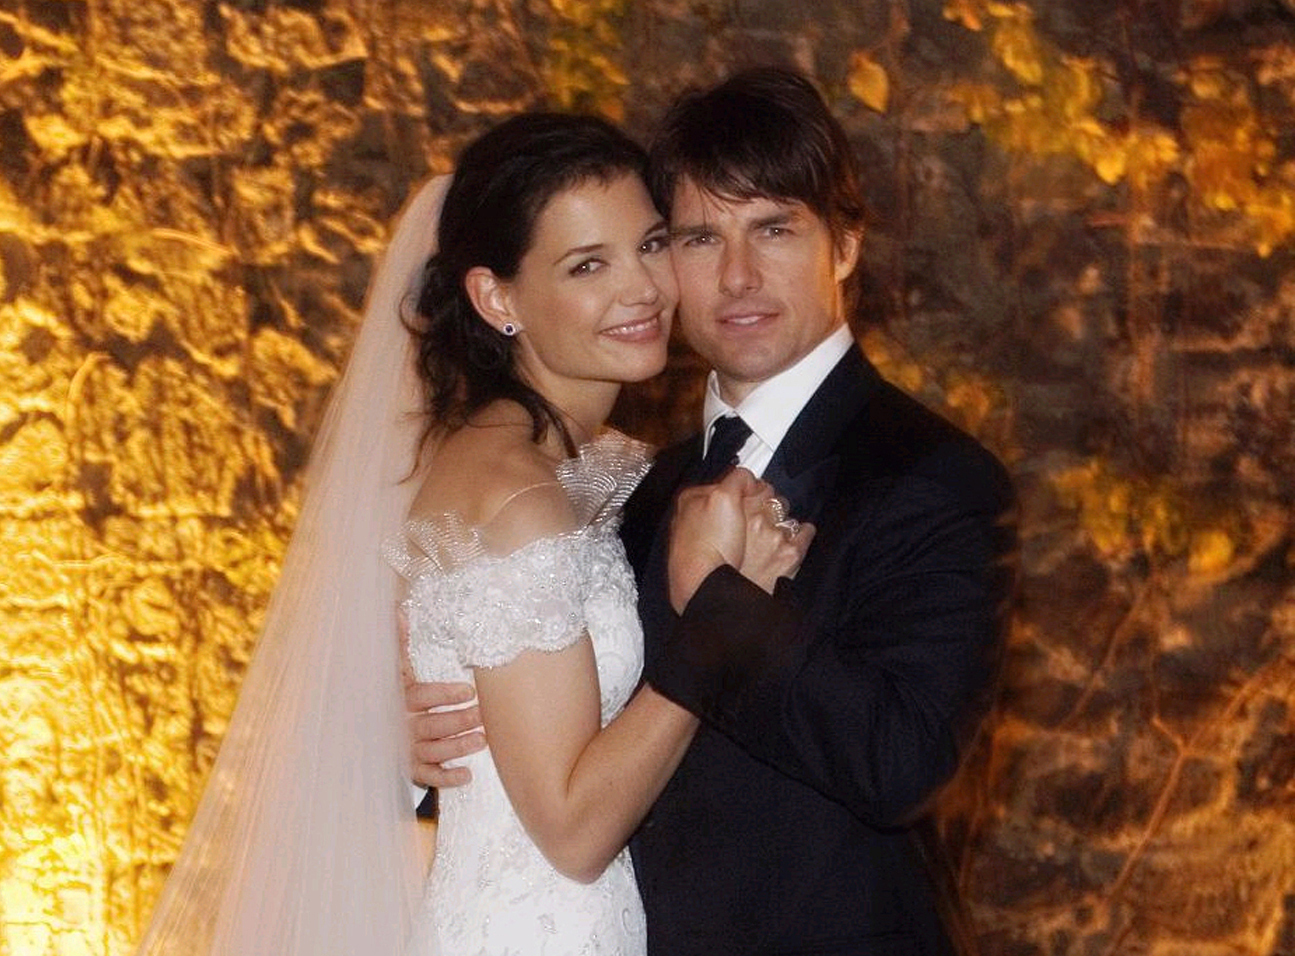 Tom Cruise and Katie Holmes on November 18, 2006 in Rome, Italy | Source: Getty Images